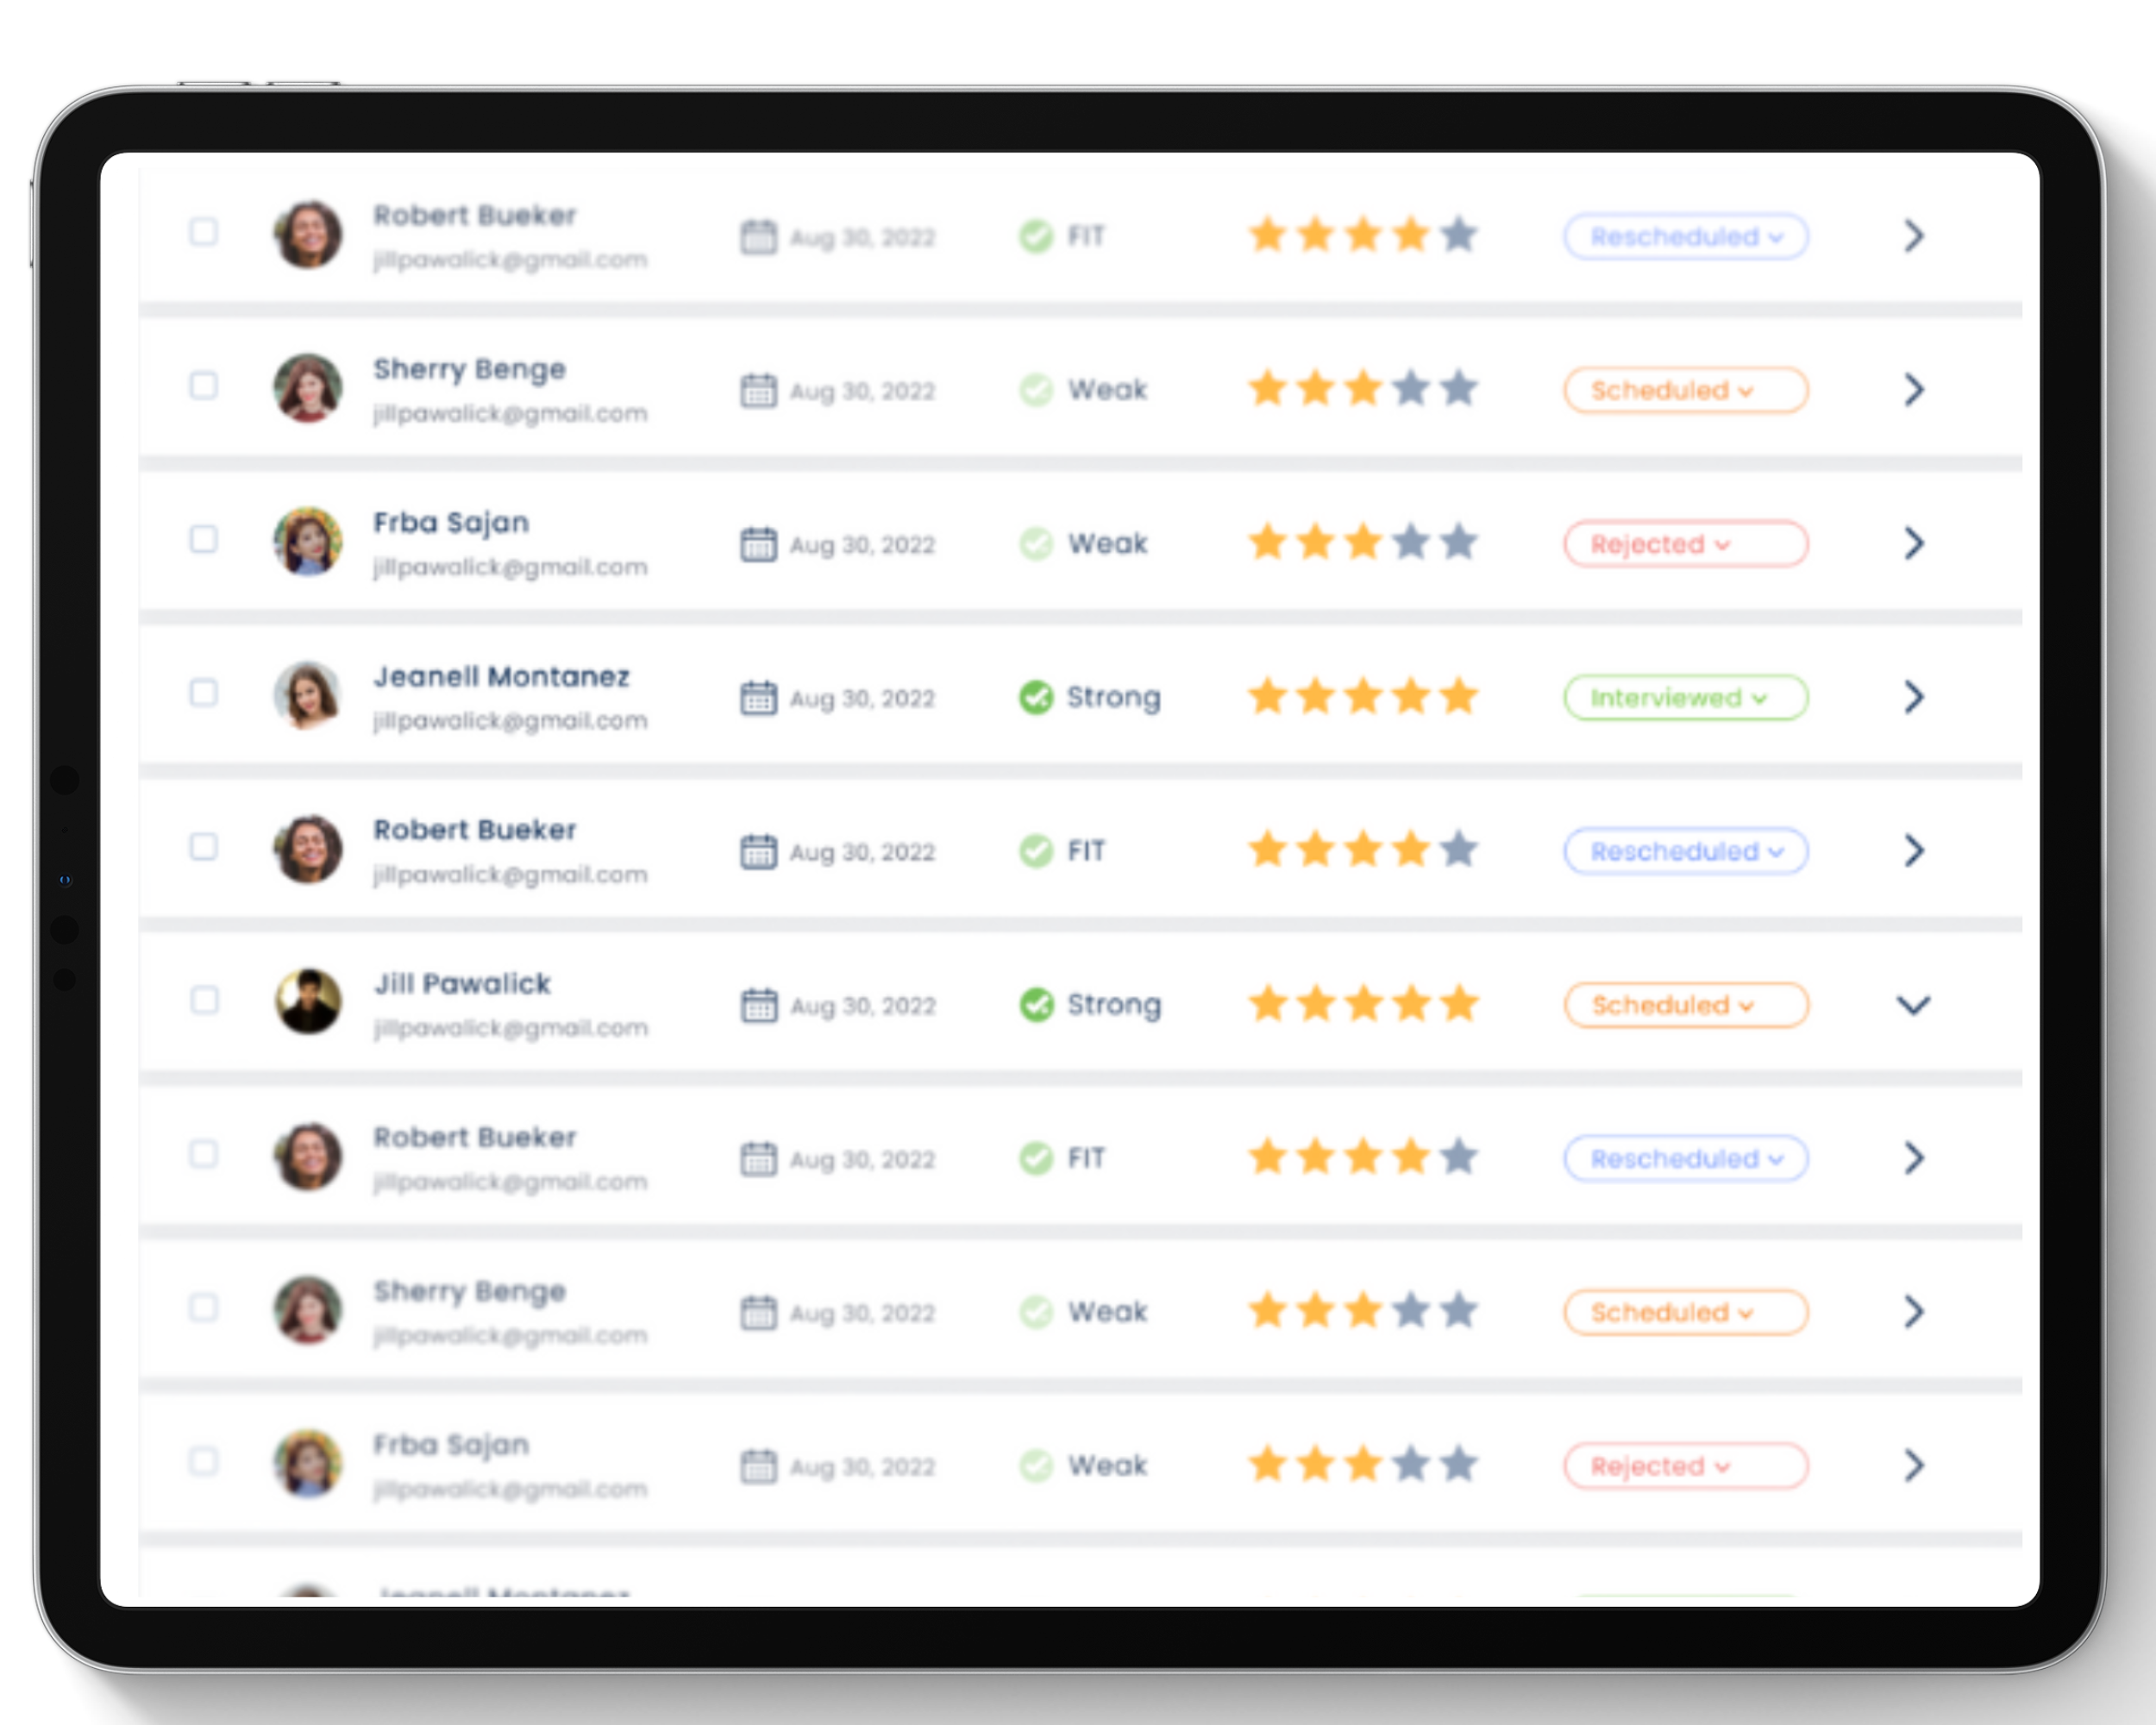 Automatically Screen, Assess, Score and Rank Applicants